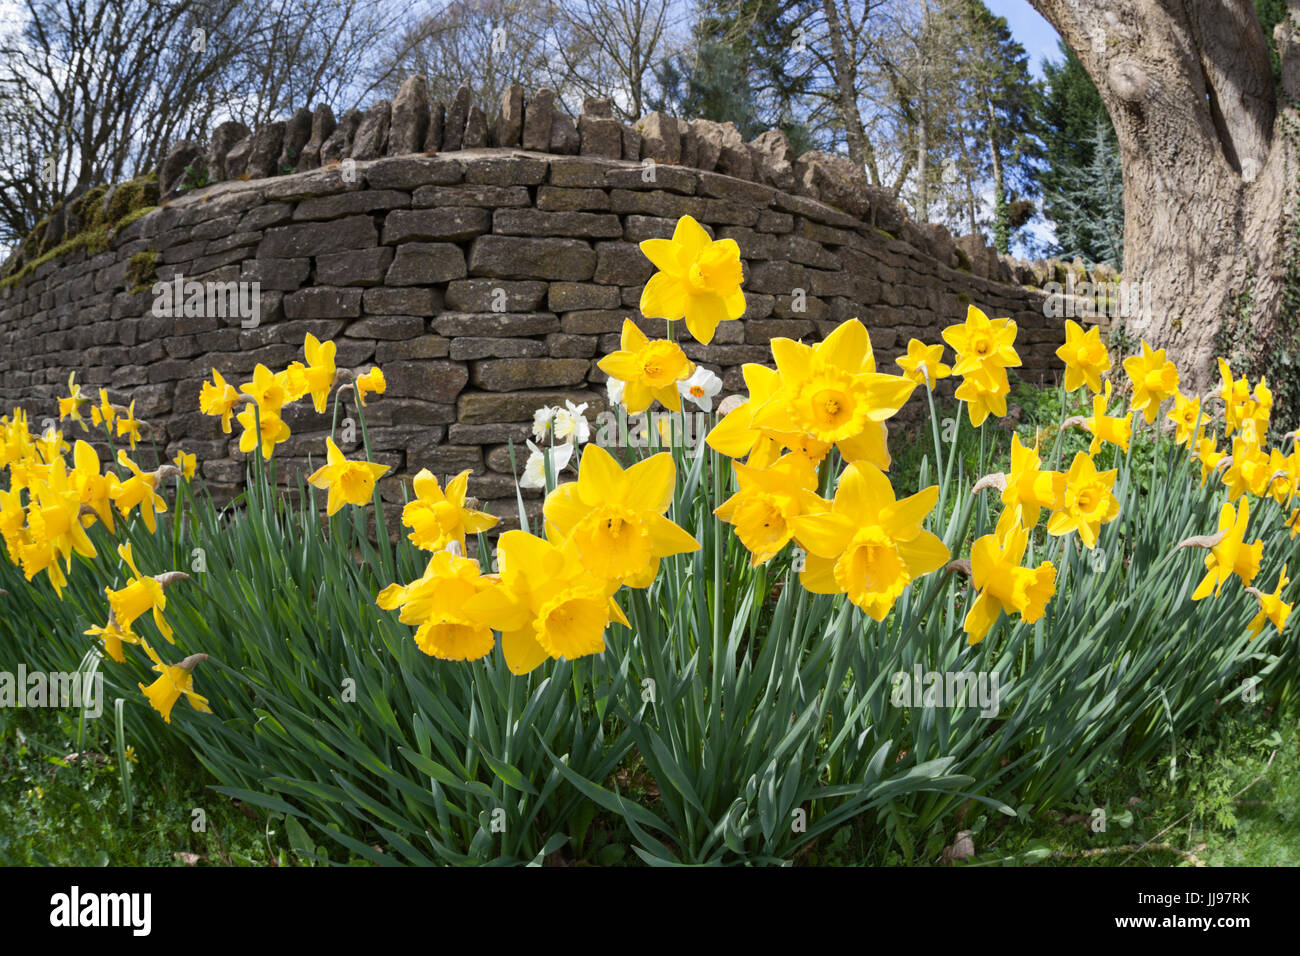 Daffodils beneath Cotswold dry stone wall, Blockley, Cotswolds, Gloucestershire, England, United Kingdom, Europe Stock Photo